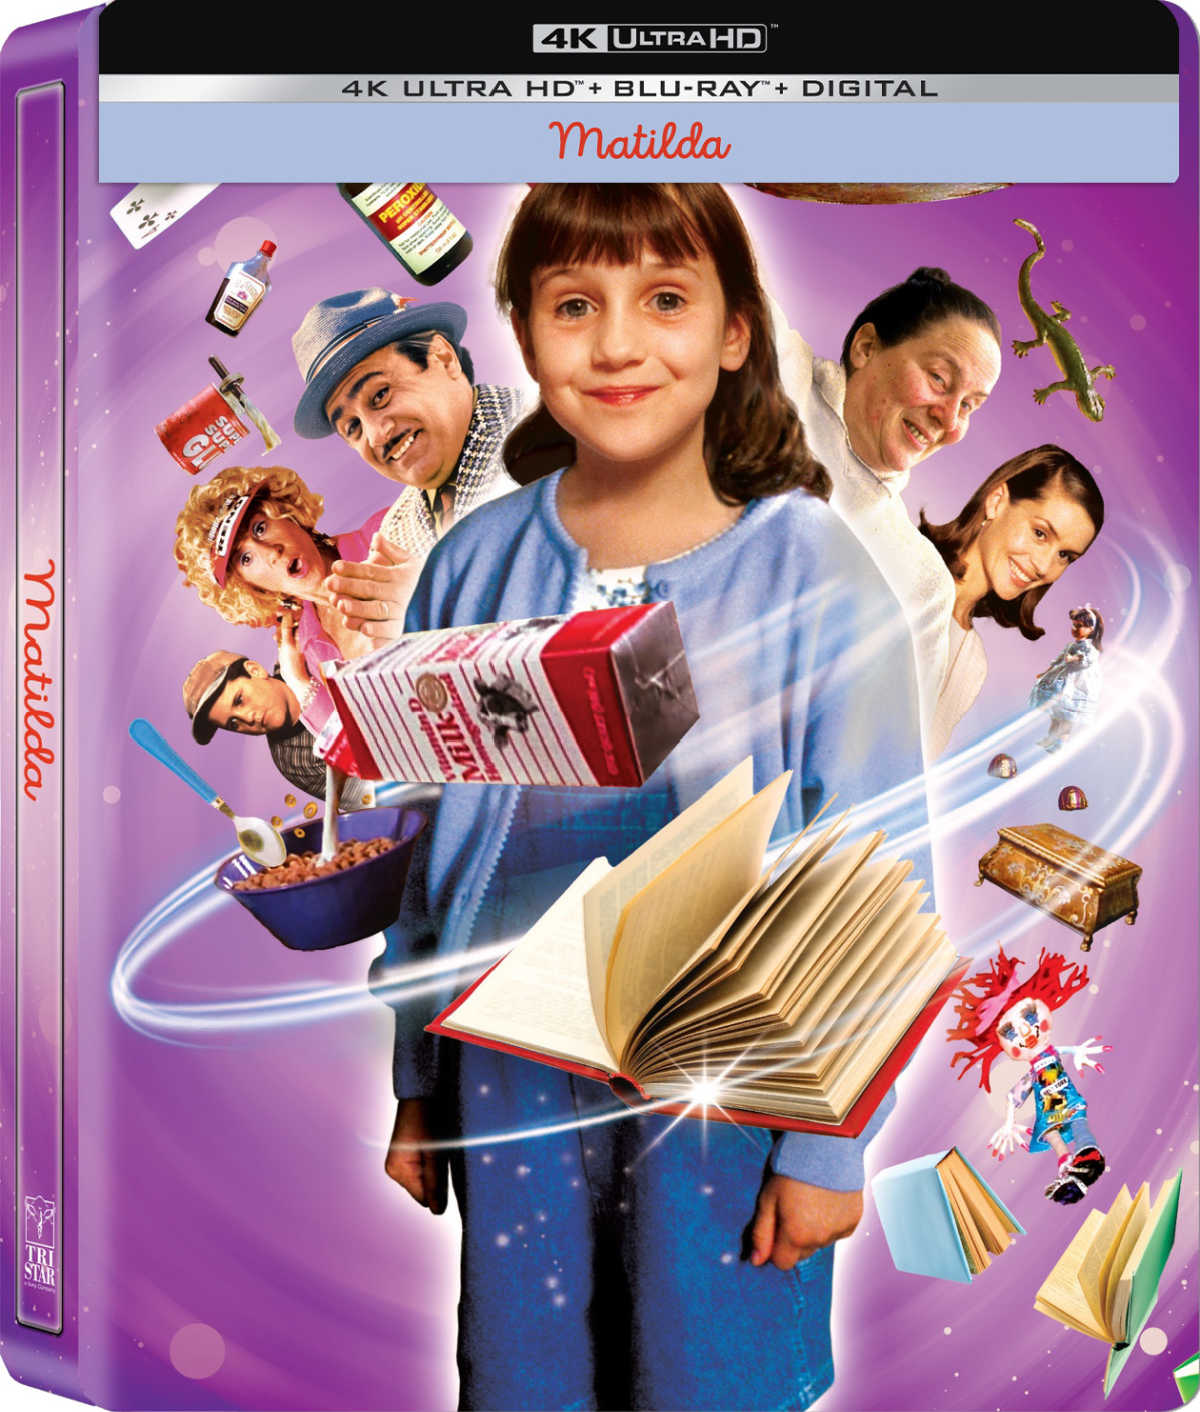 The new limited edition Matilda SteelBook is a must-have for fans of the classic film. This special edition features a unique design, behind-the-scenes footage, and interviews with the cast and crew. Order yours today!